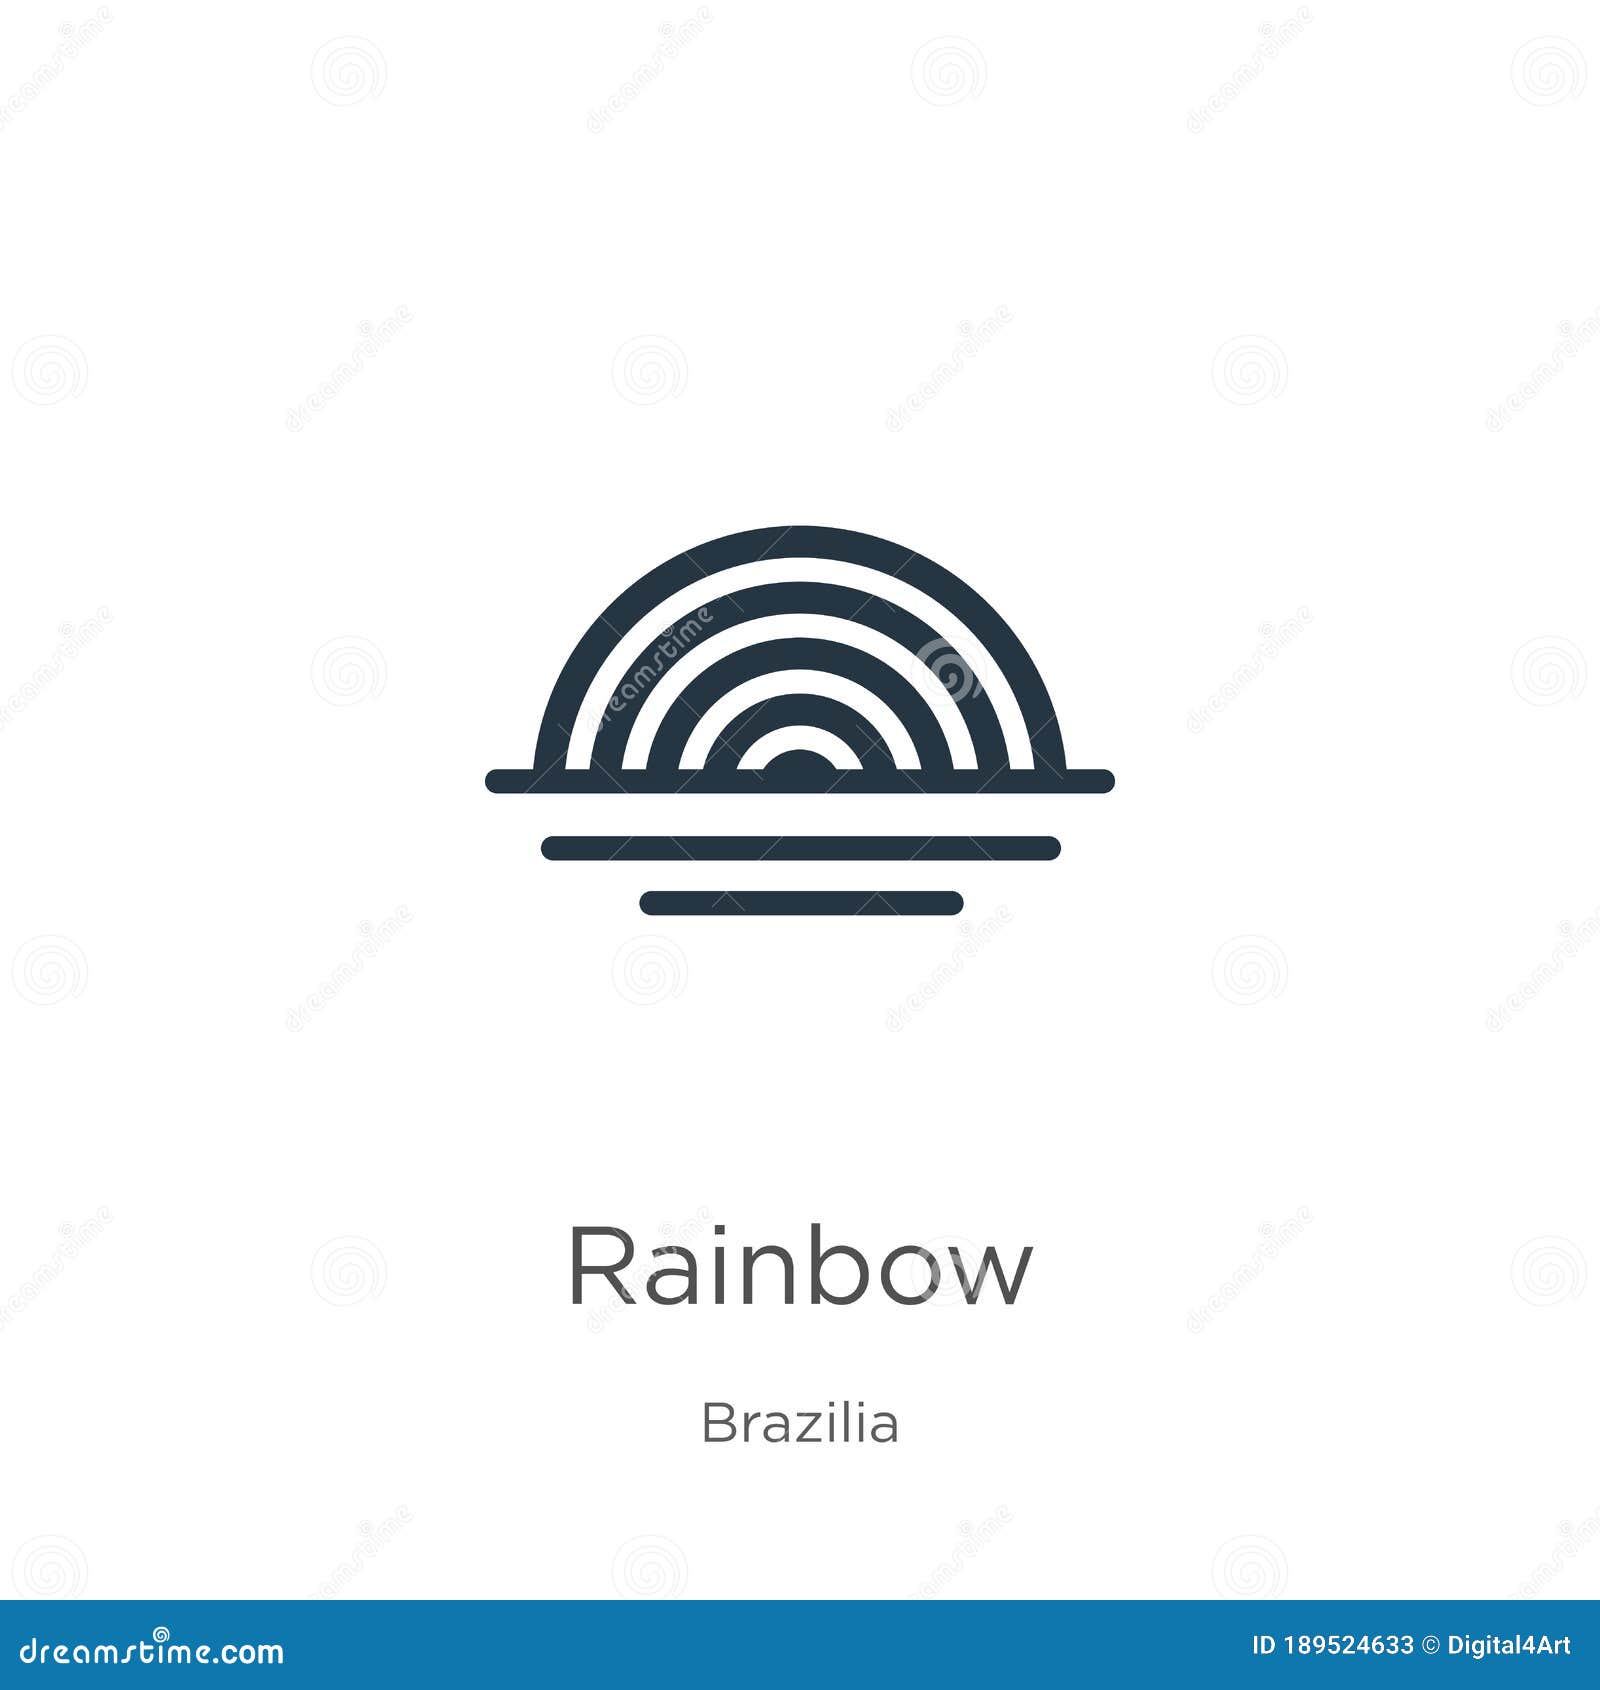 rainbow icon . trendy flat rainbow icon from brazilia collection  on white background.   can be